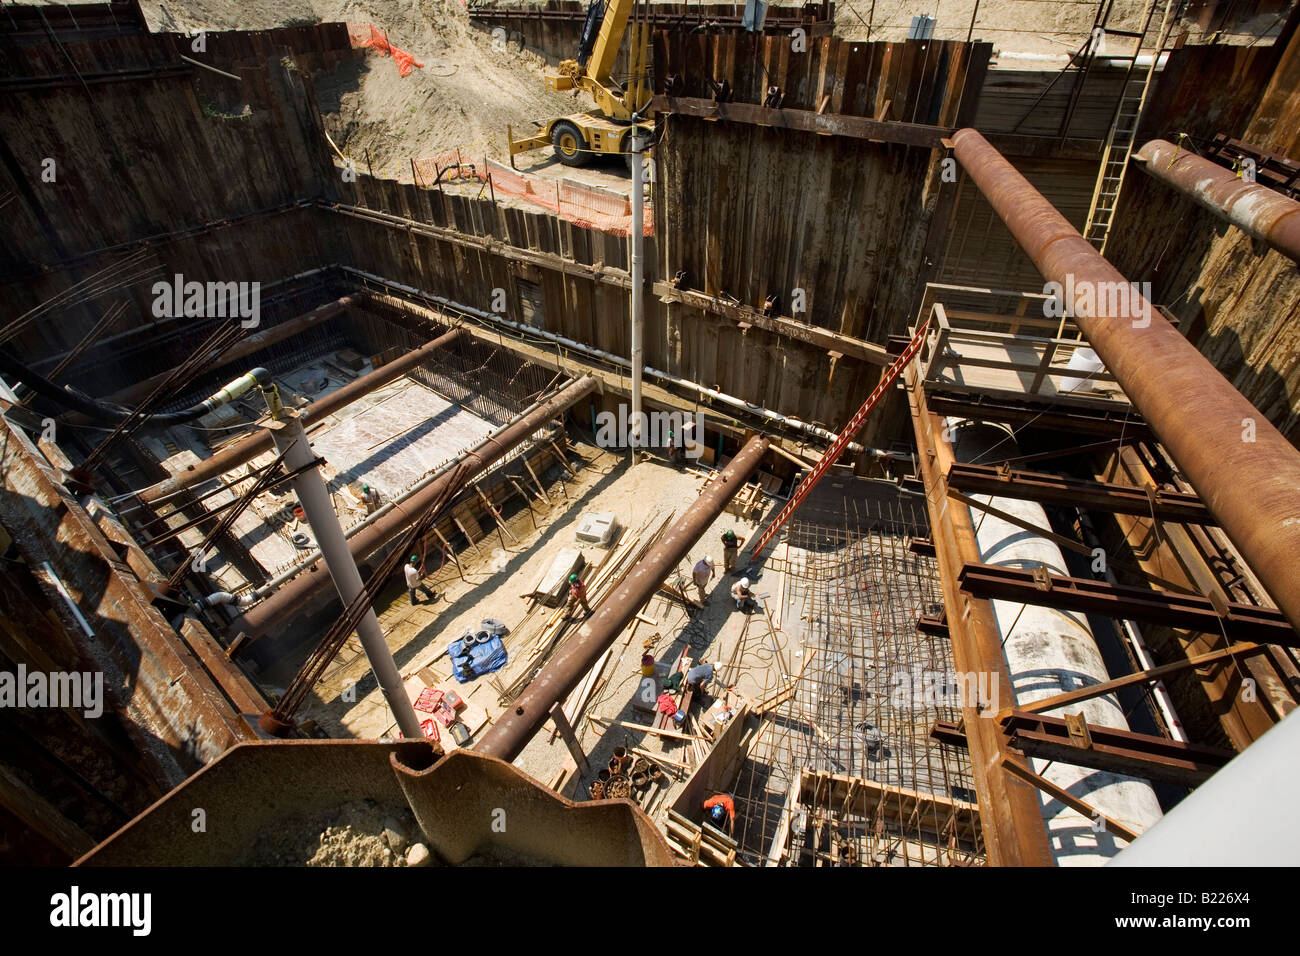 A construction crew works on building a sewage treatment plant in New England Stock Photo